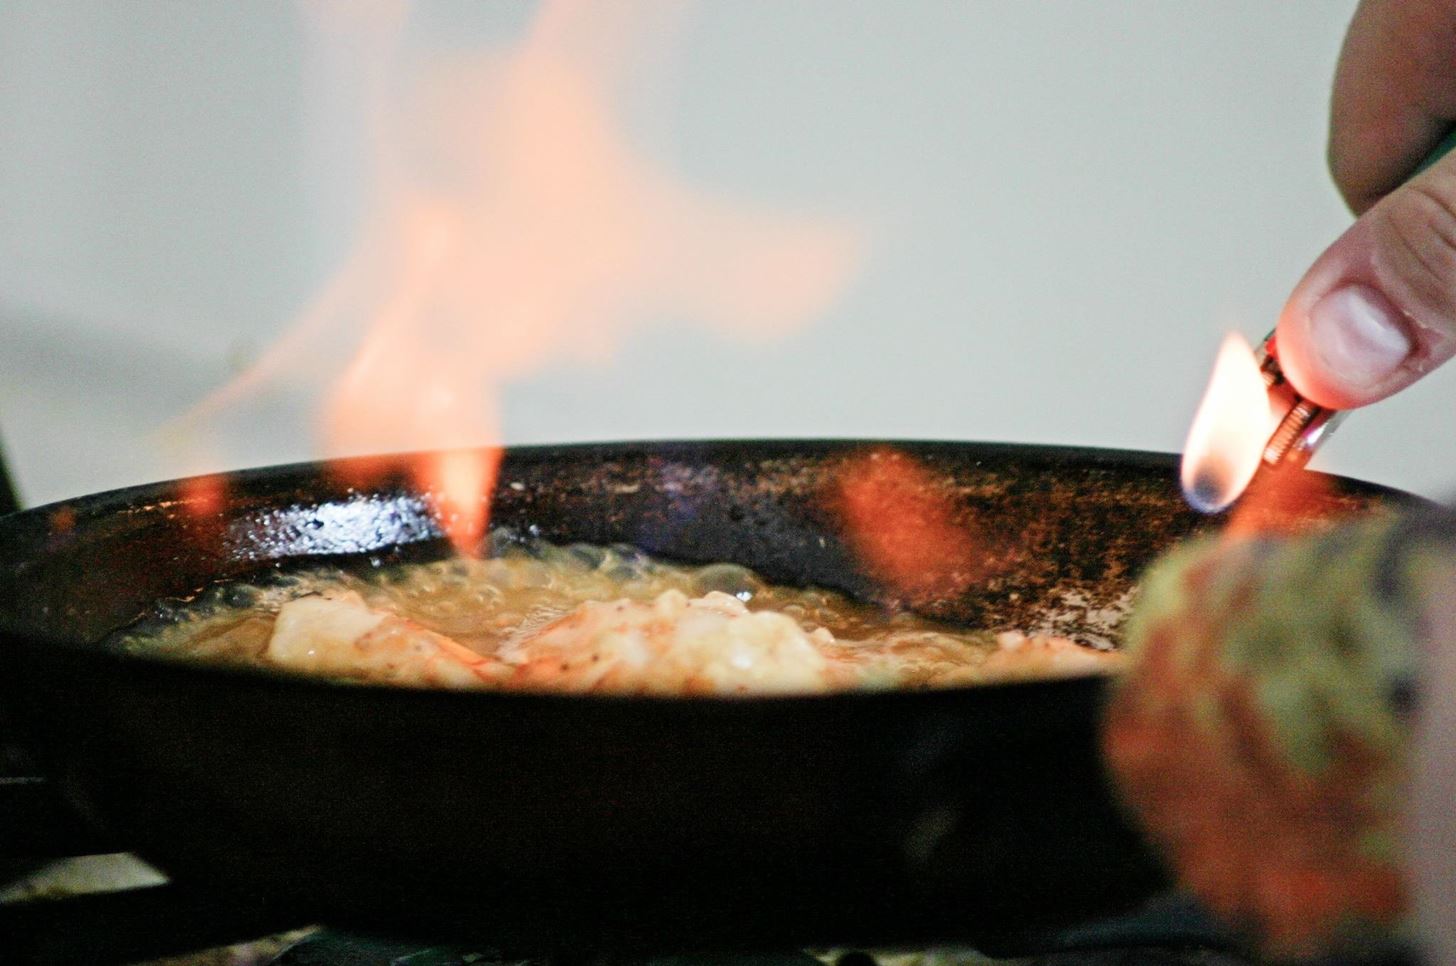 How to Properly Flambé Without Burning Your Food